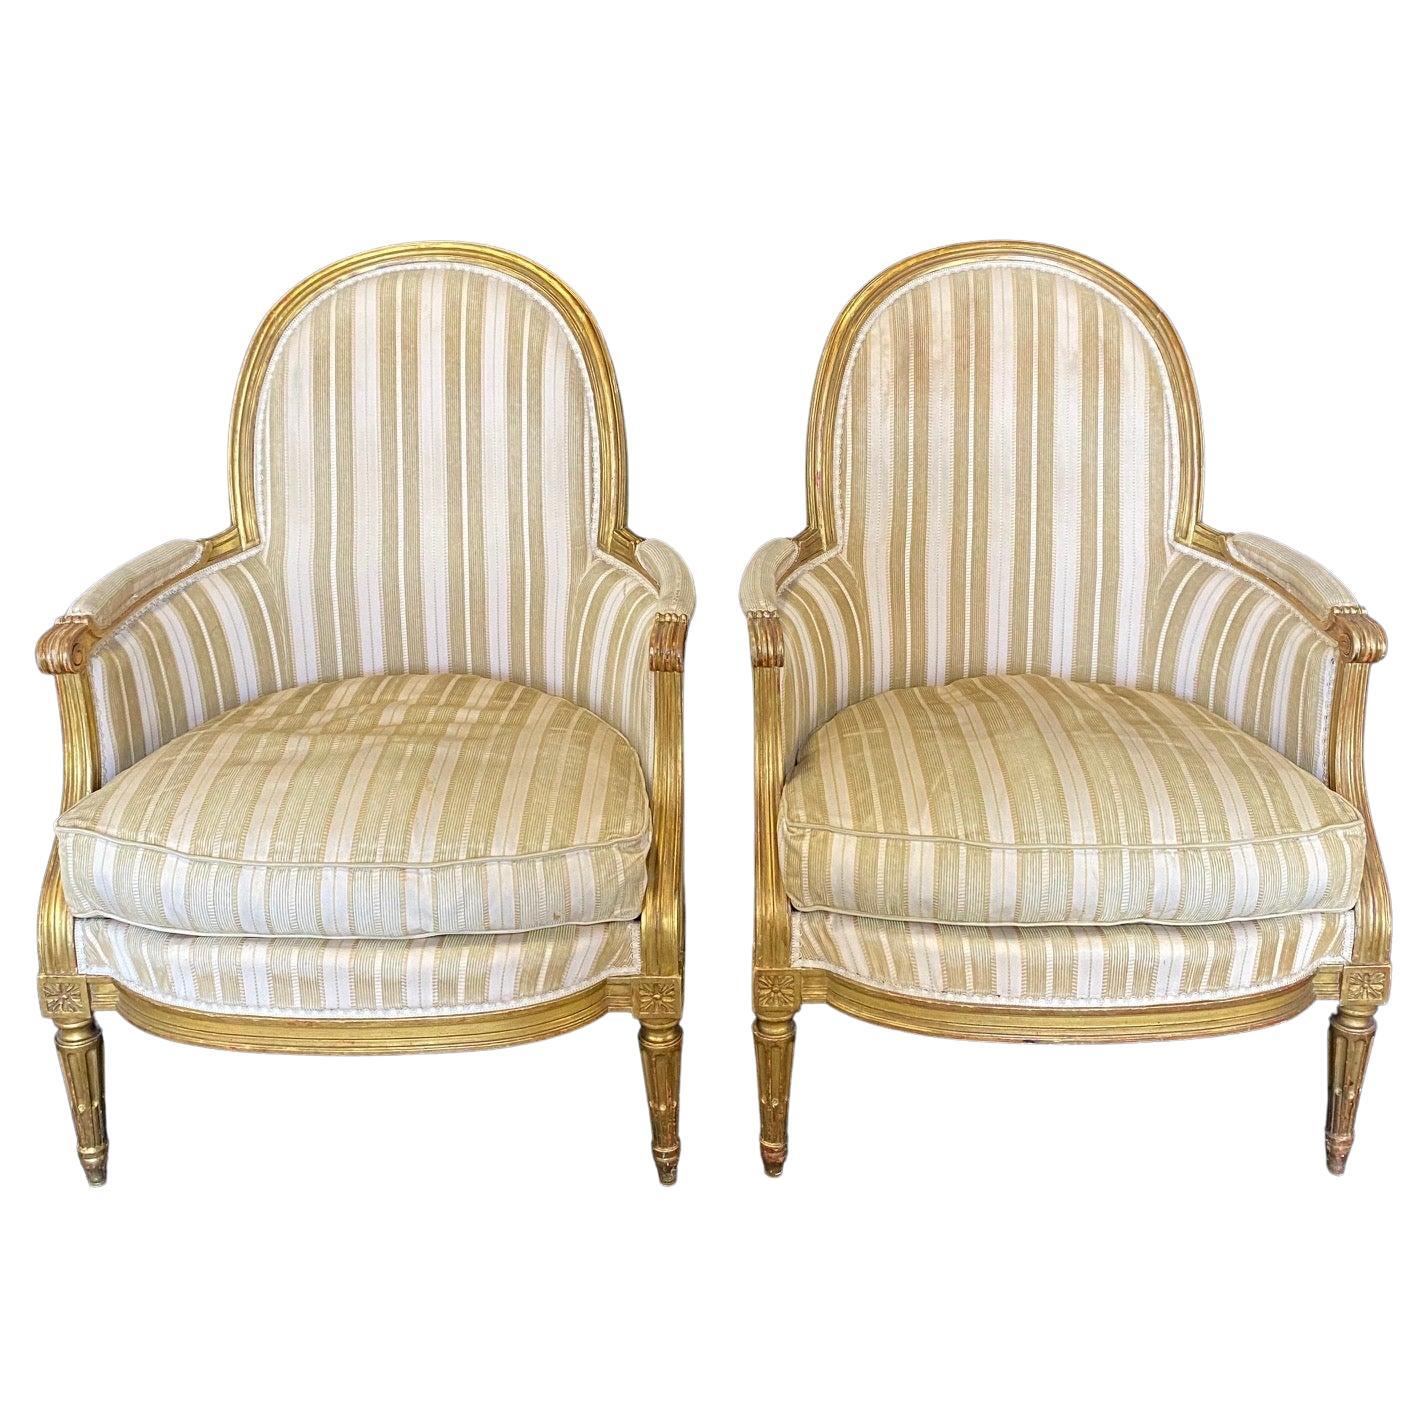 #6158, 19th Century Pair of Rare French Louis XVI Bergeres Chairs with Original